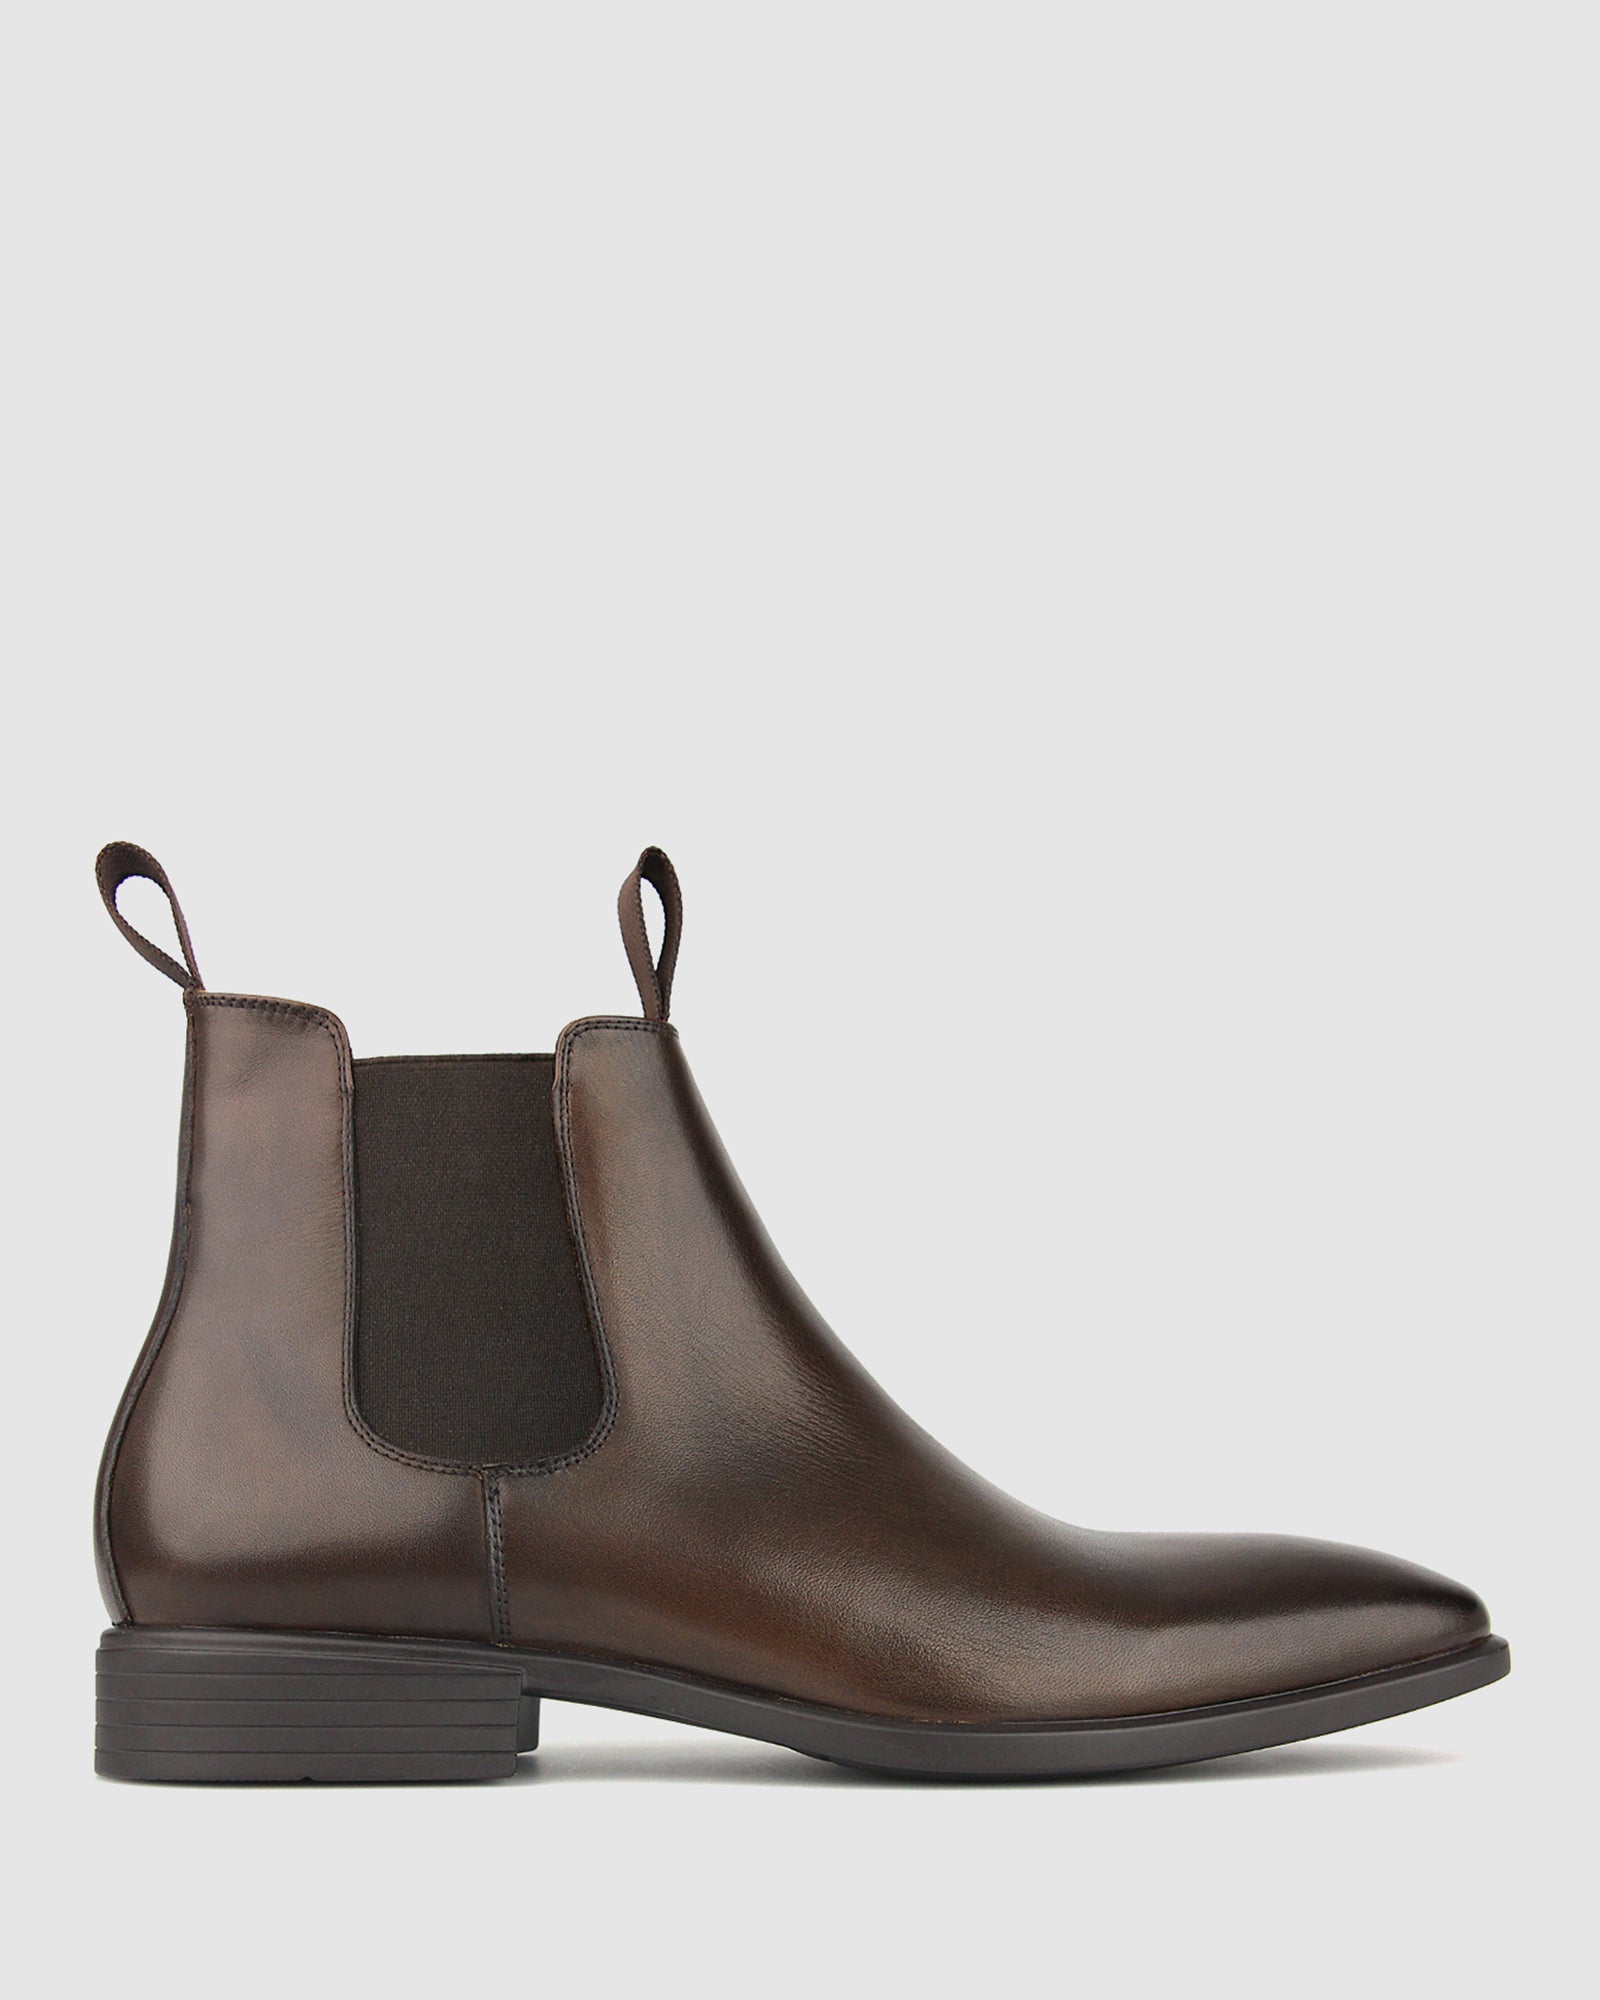 Buy HENRY Leather Chelsea Boots by Airflex online - Betts